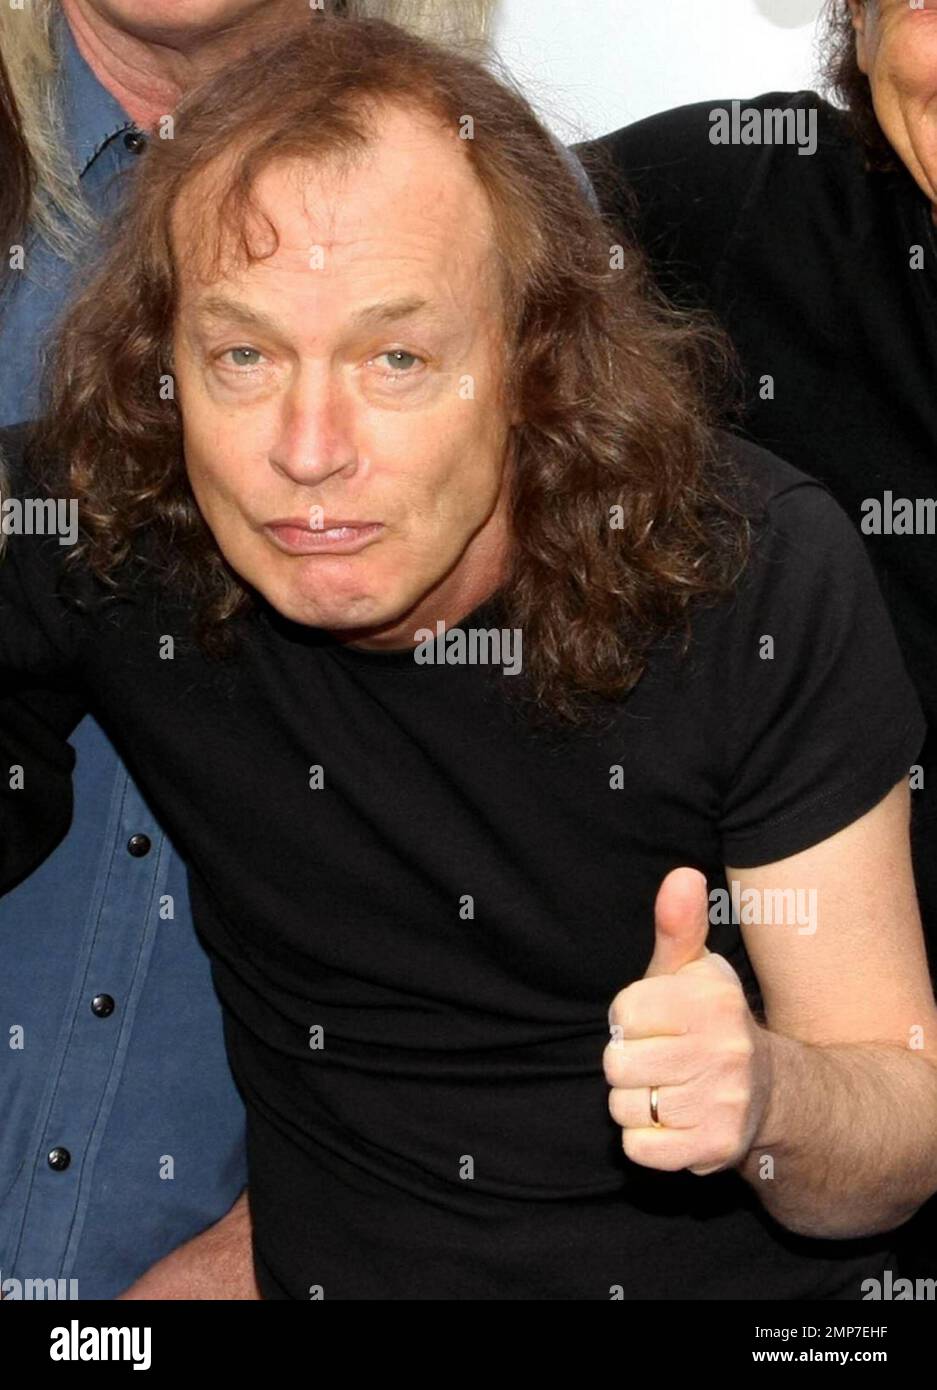 AC/DC band member Angus Young at the AC/DC 'Live at River Plate' DVD World Premiere at the HMV Hammersmith Apollo. London, UK. 5/6/11. Stock Photo